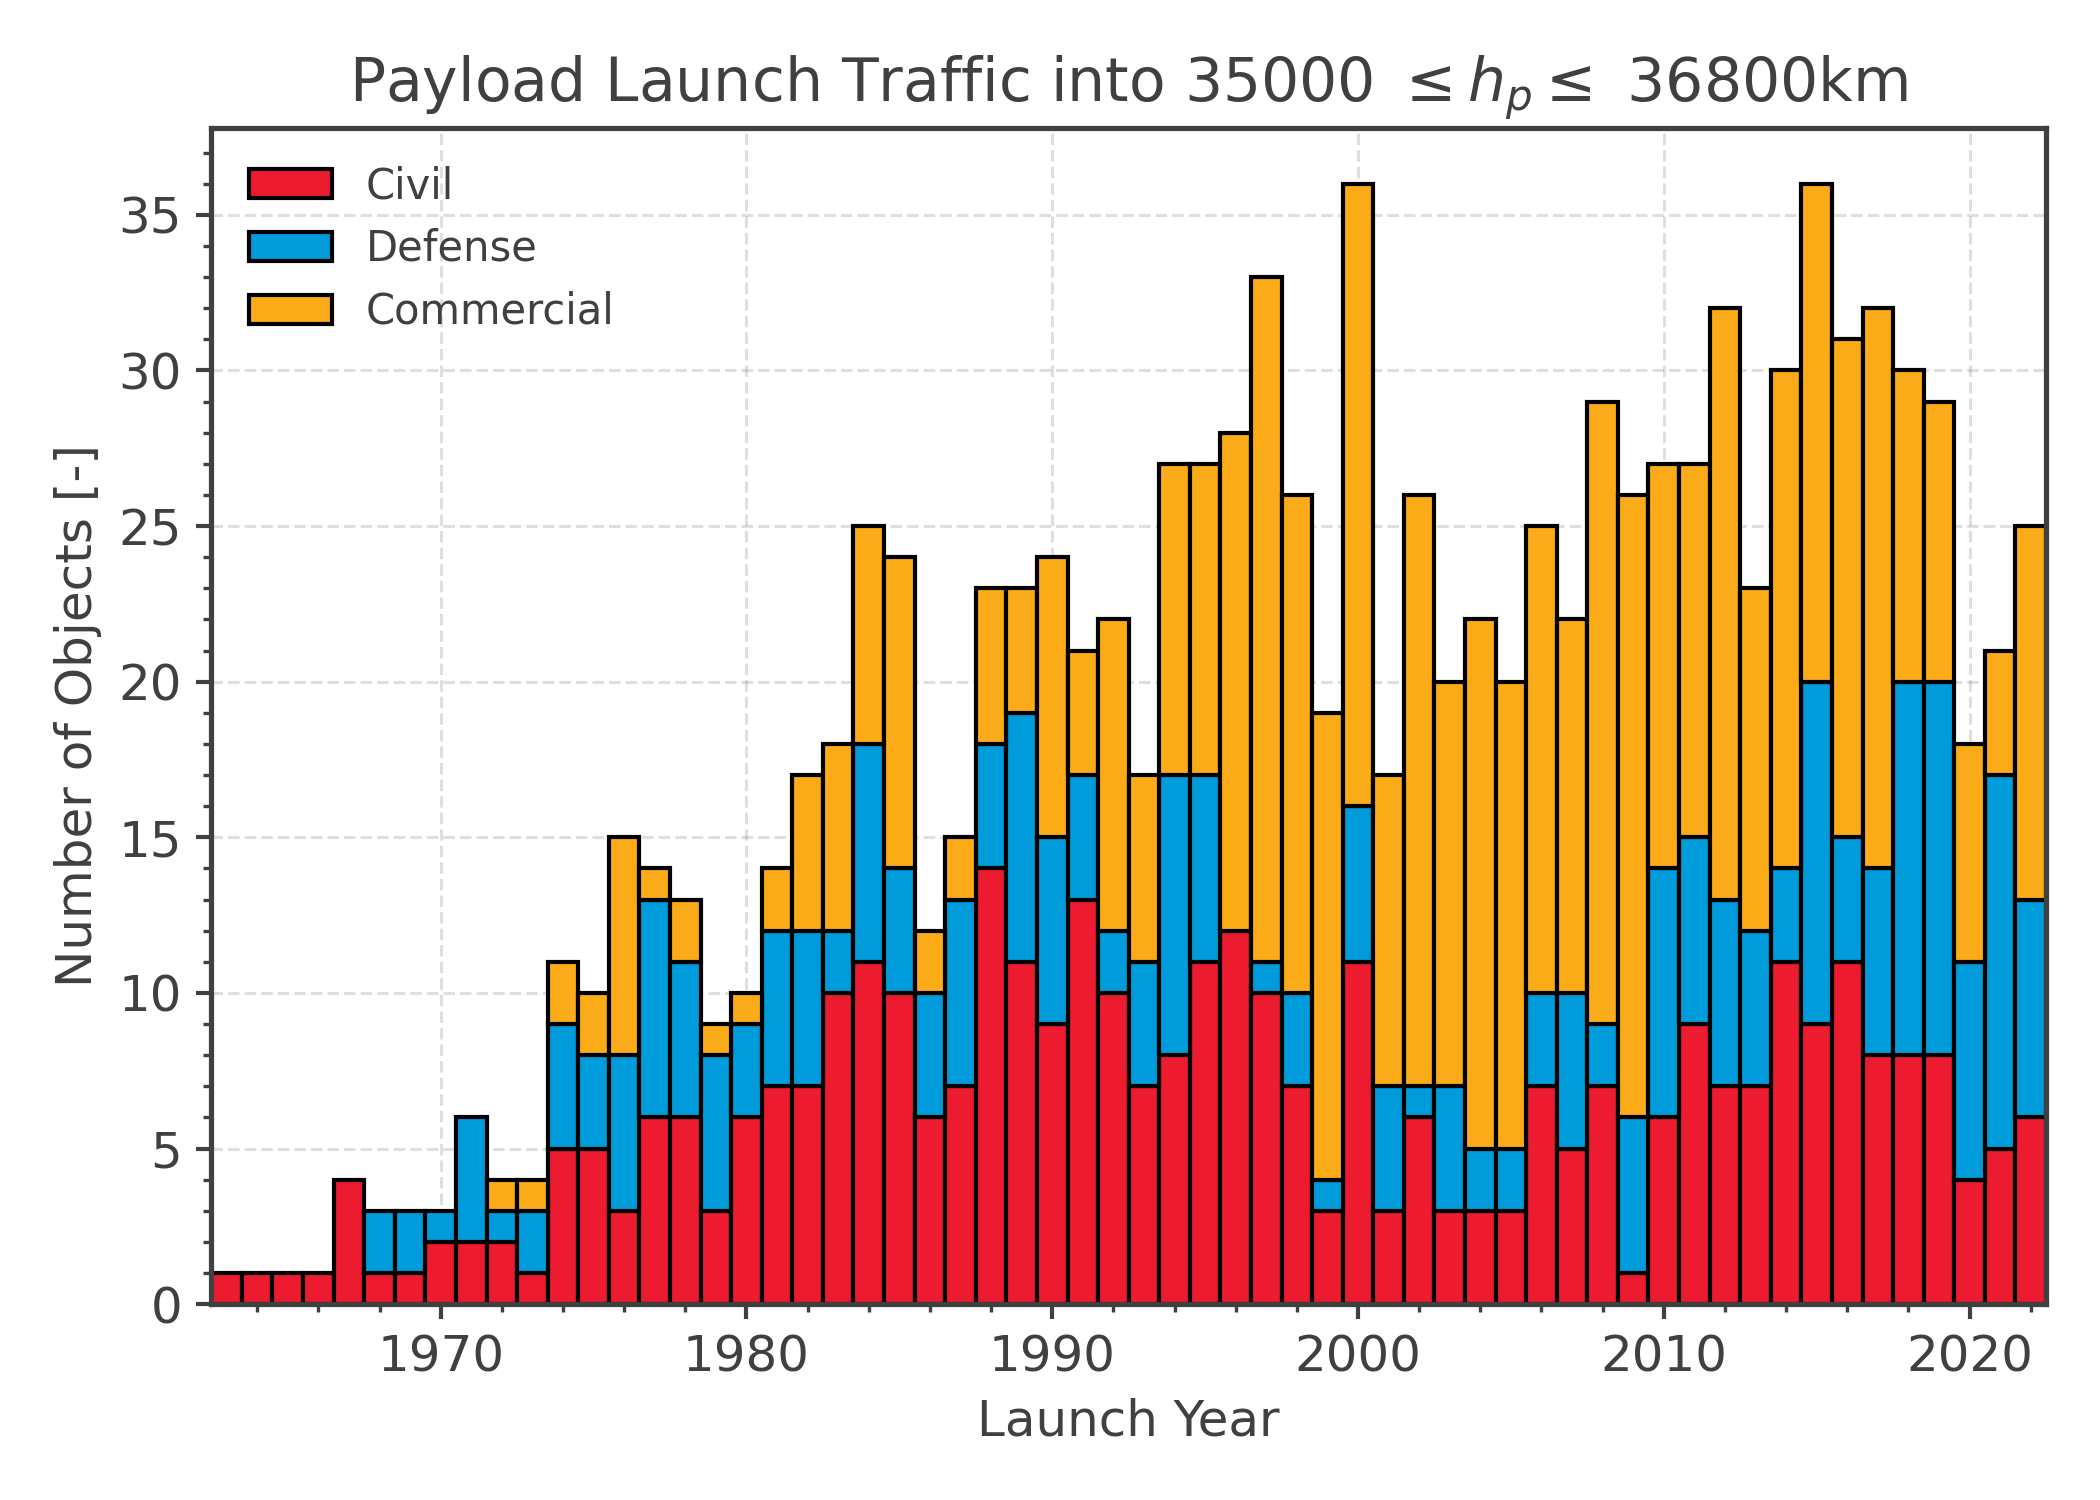 Launch traffic to GEO over time